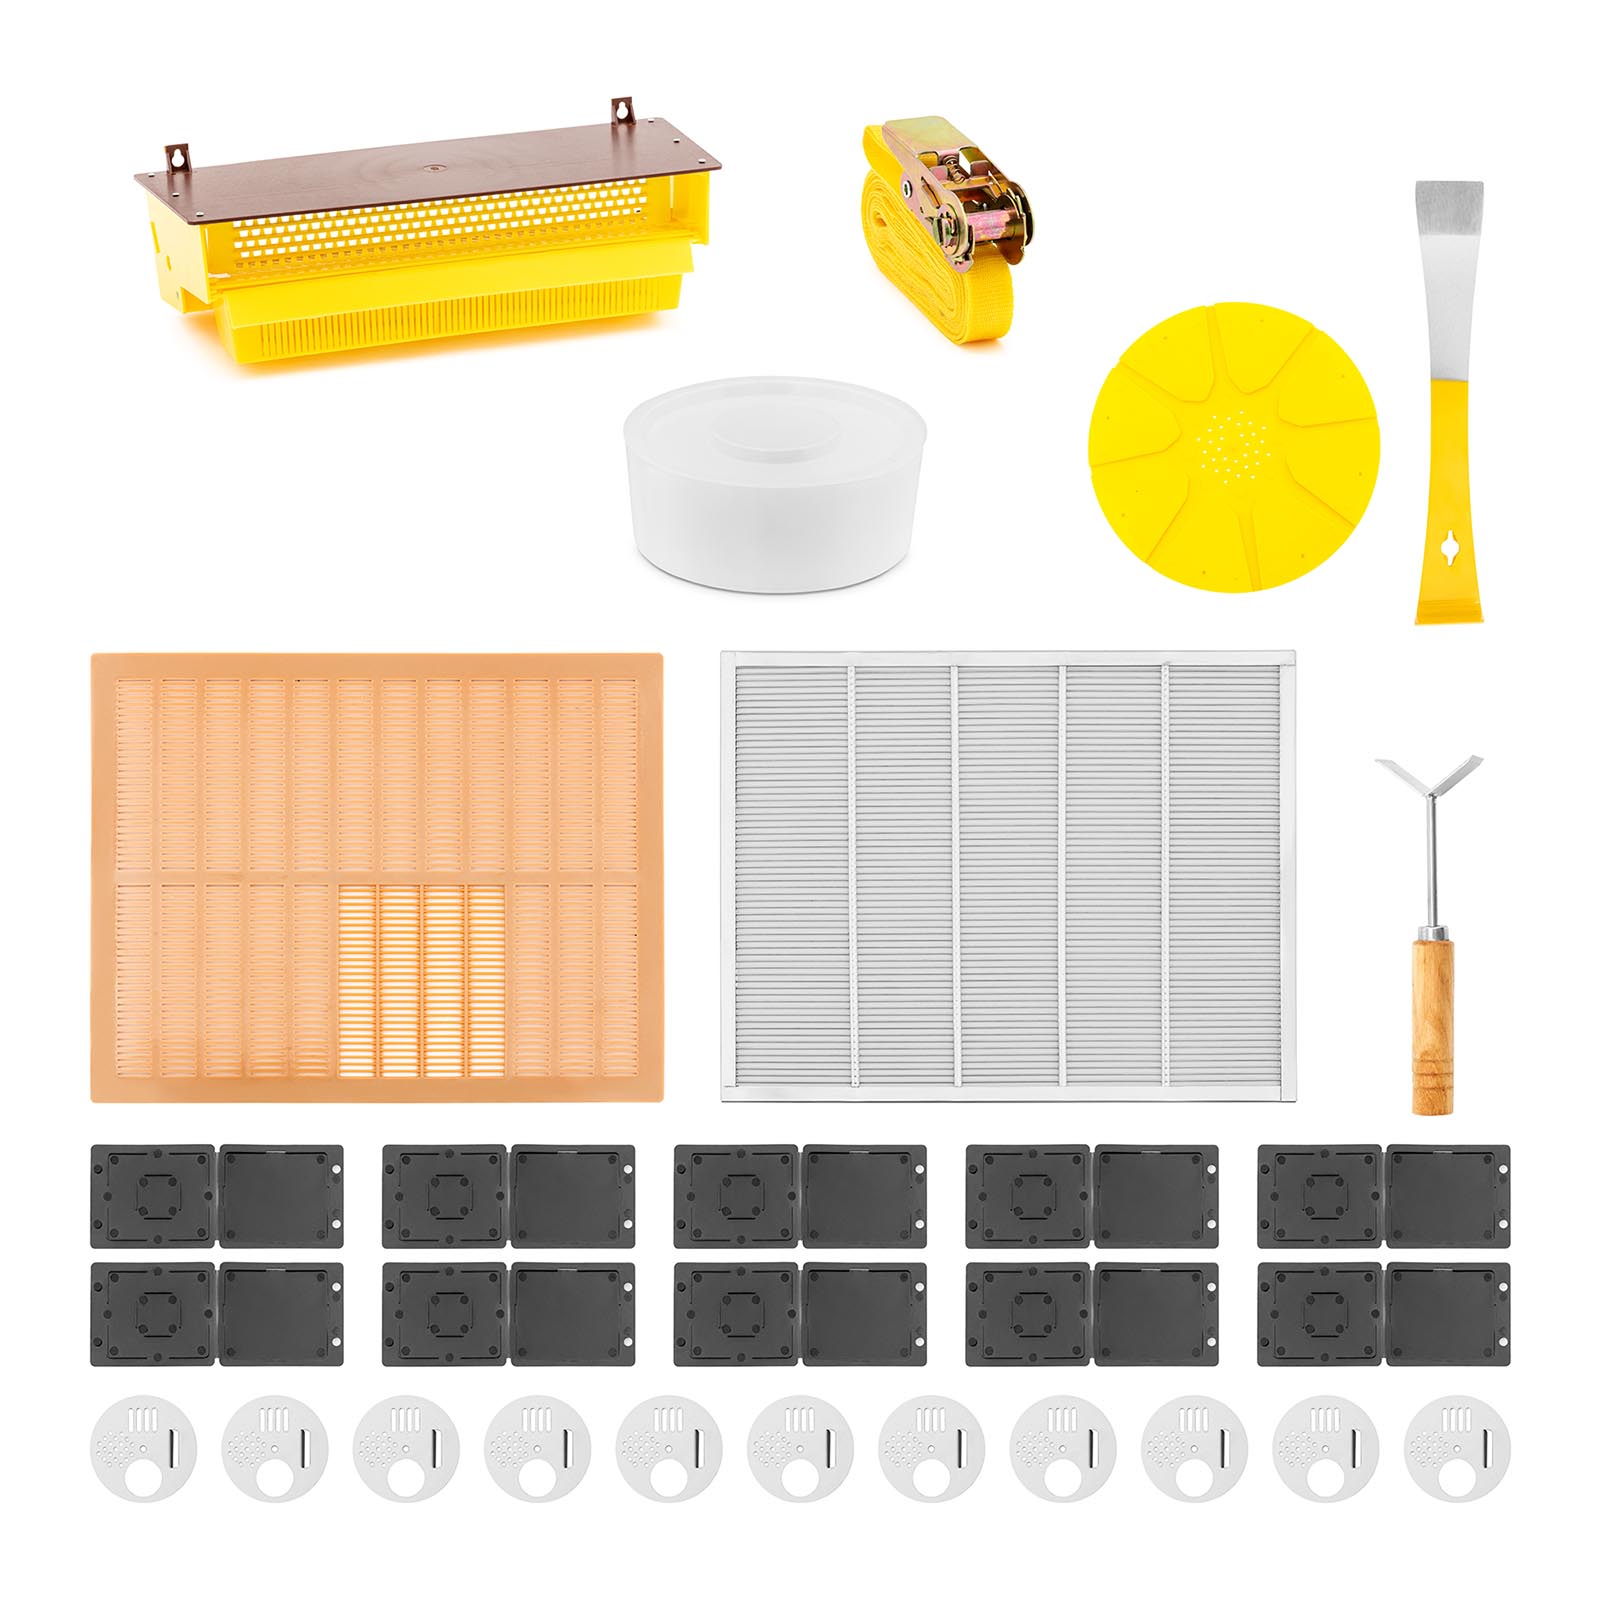 Beekeeping Starter Kit - 28 pcs - stick chisel - hive strap - pollen trap - barrier grid - insect trap